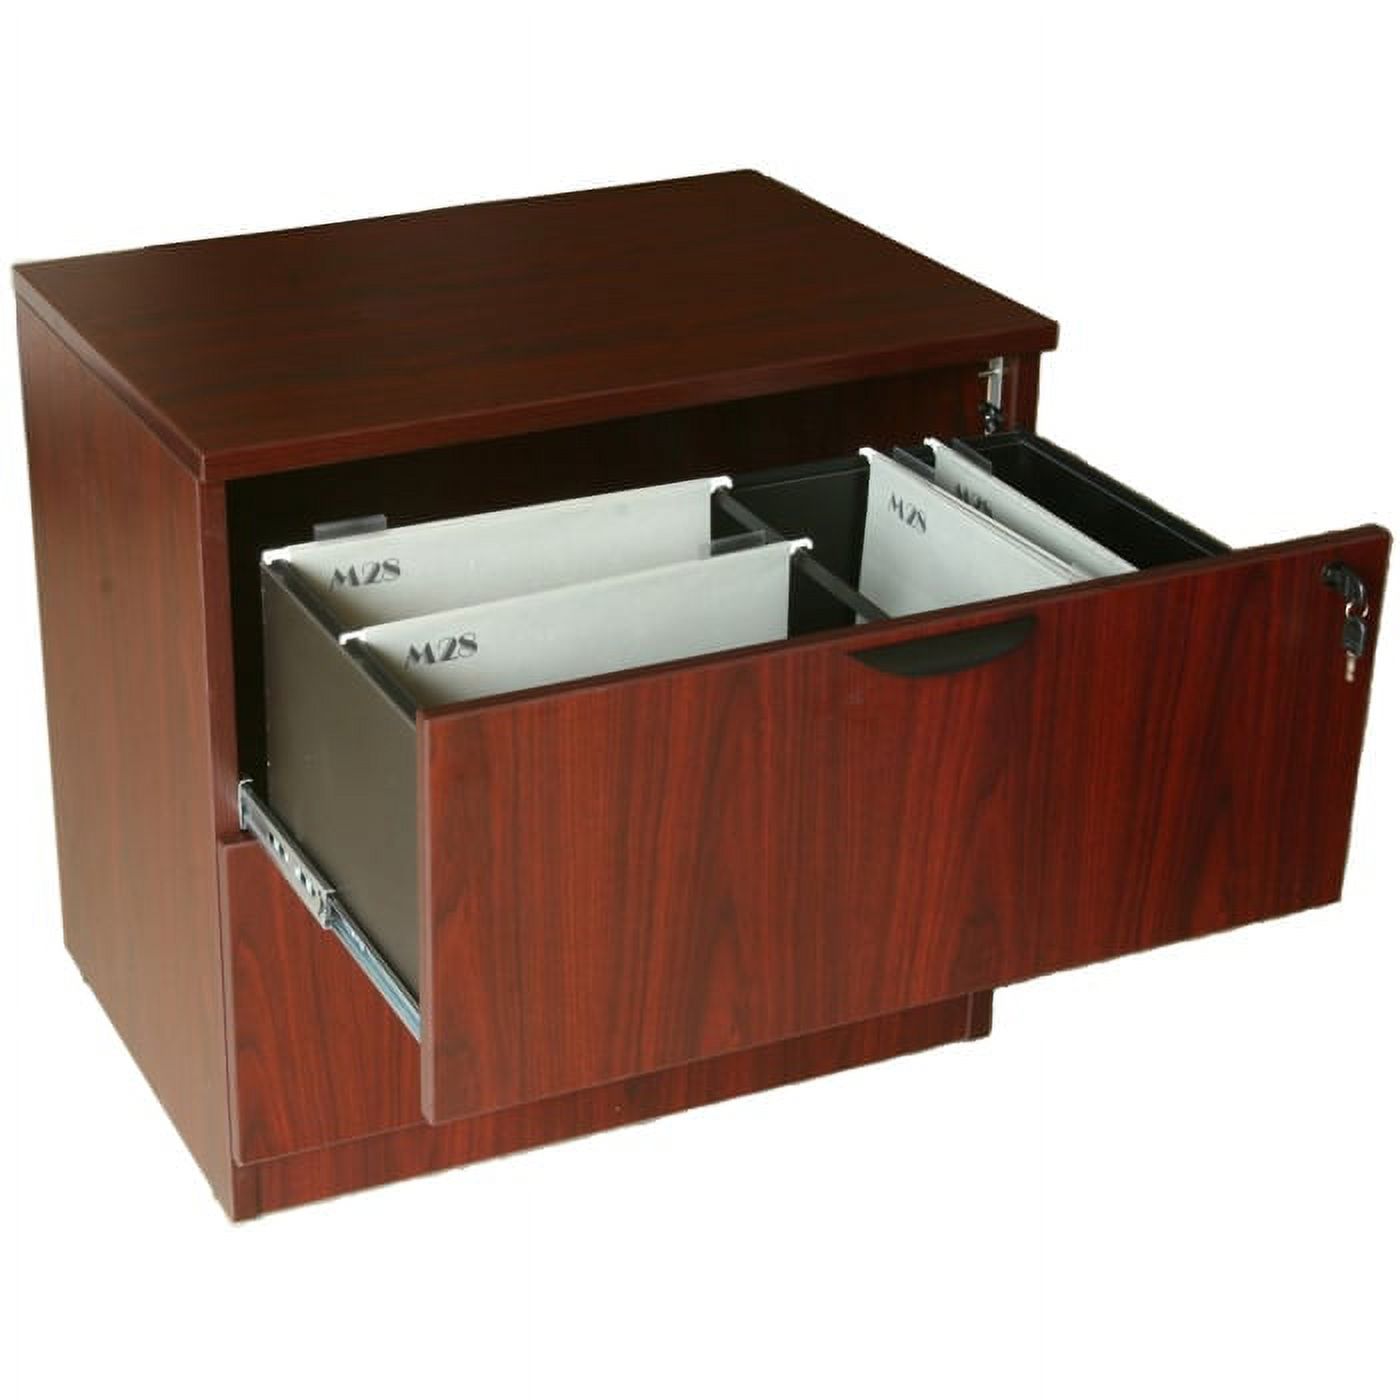 Boss N112-C 2-drawer Lateral File - Cherry - image 3 of 4